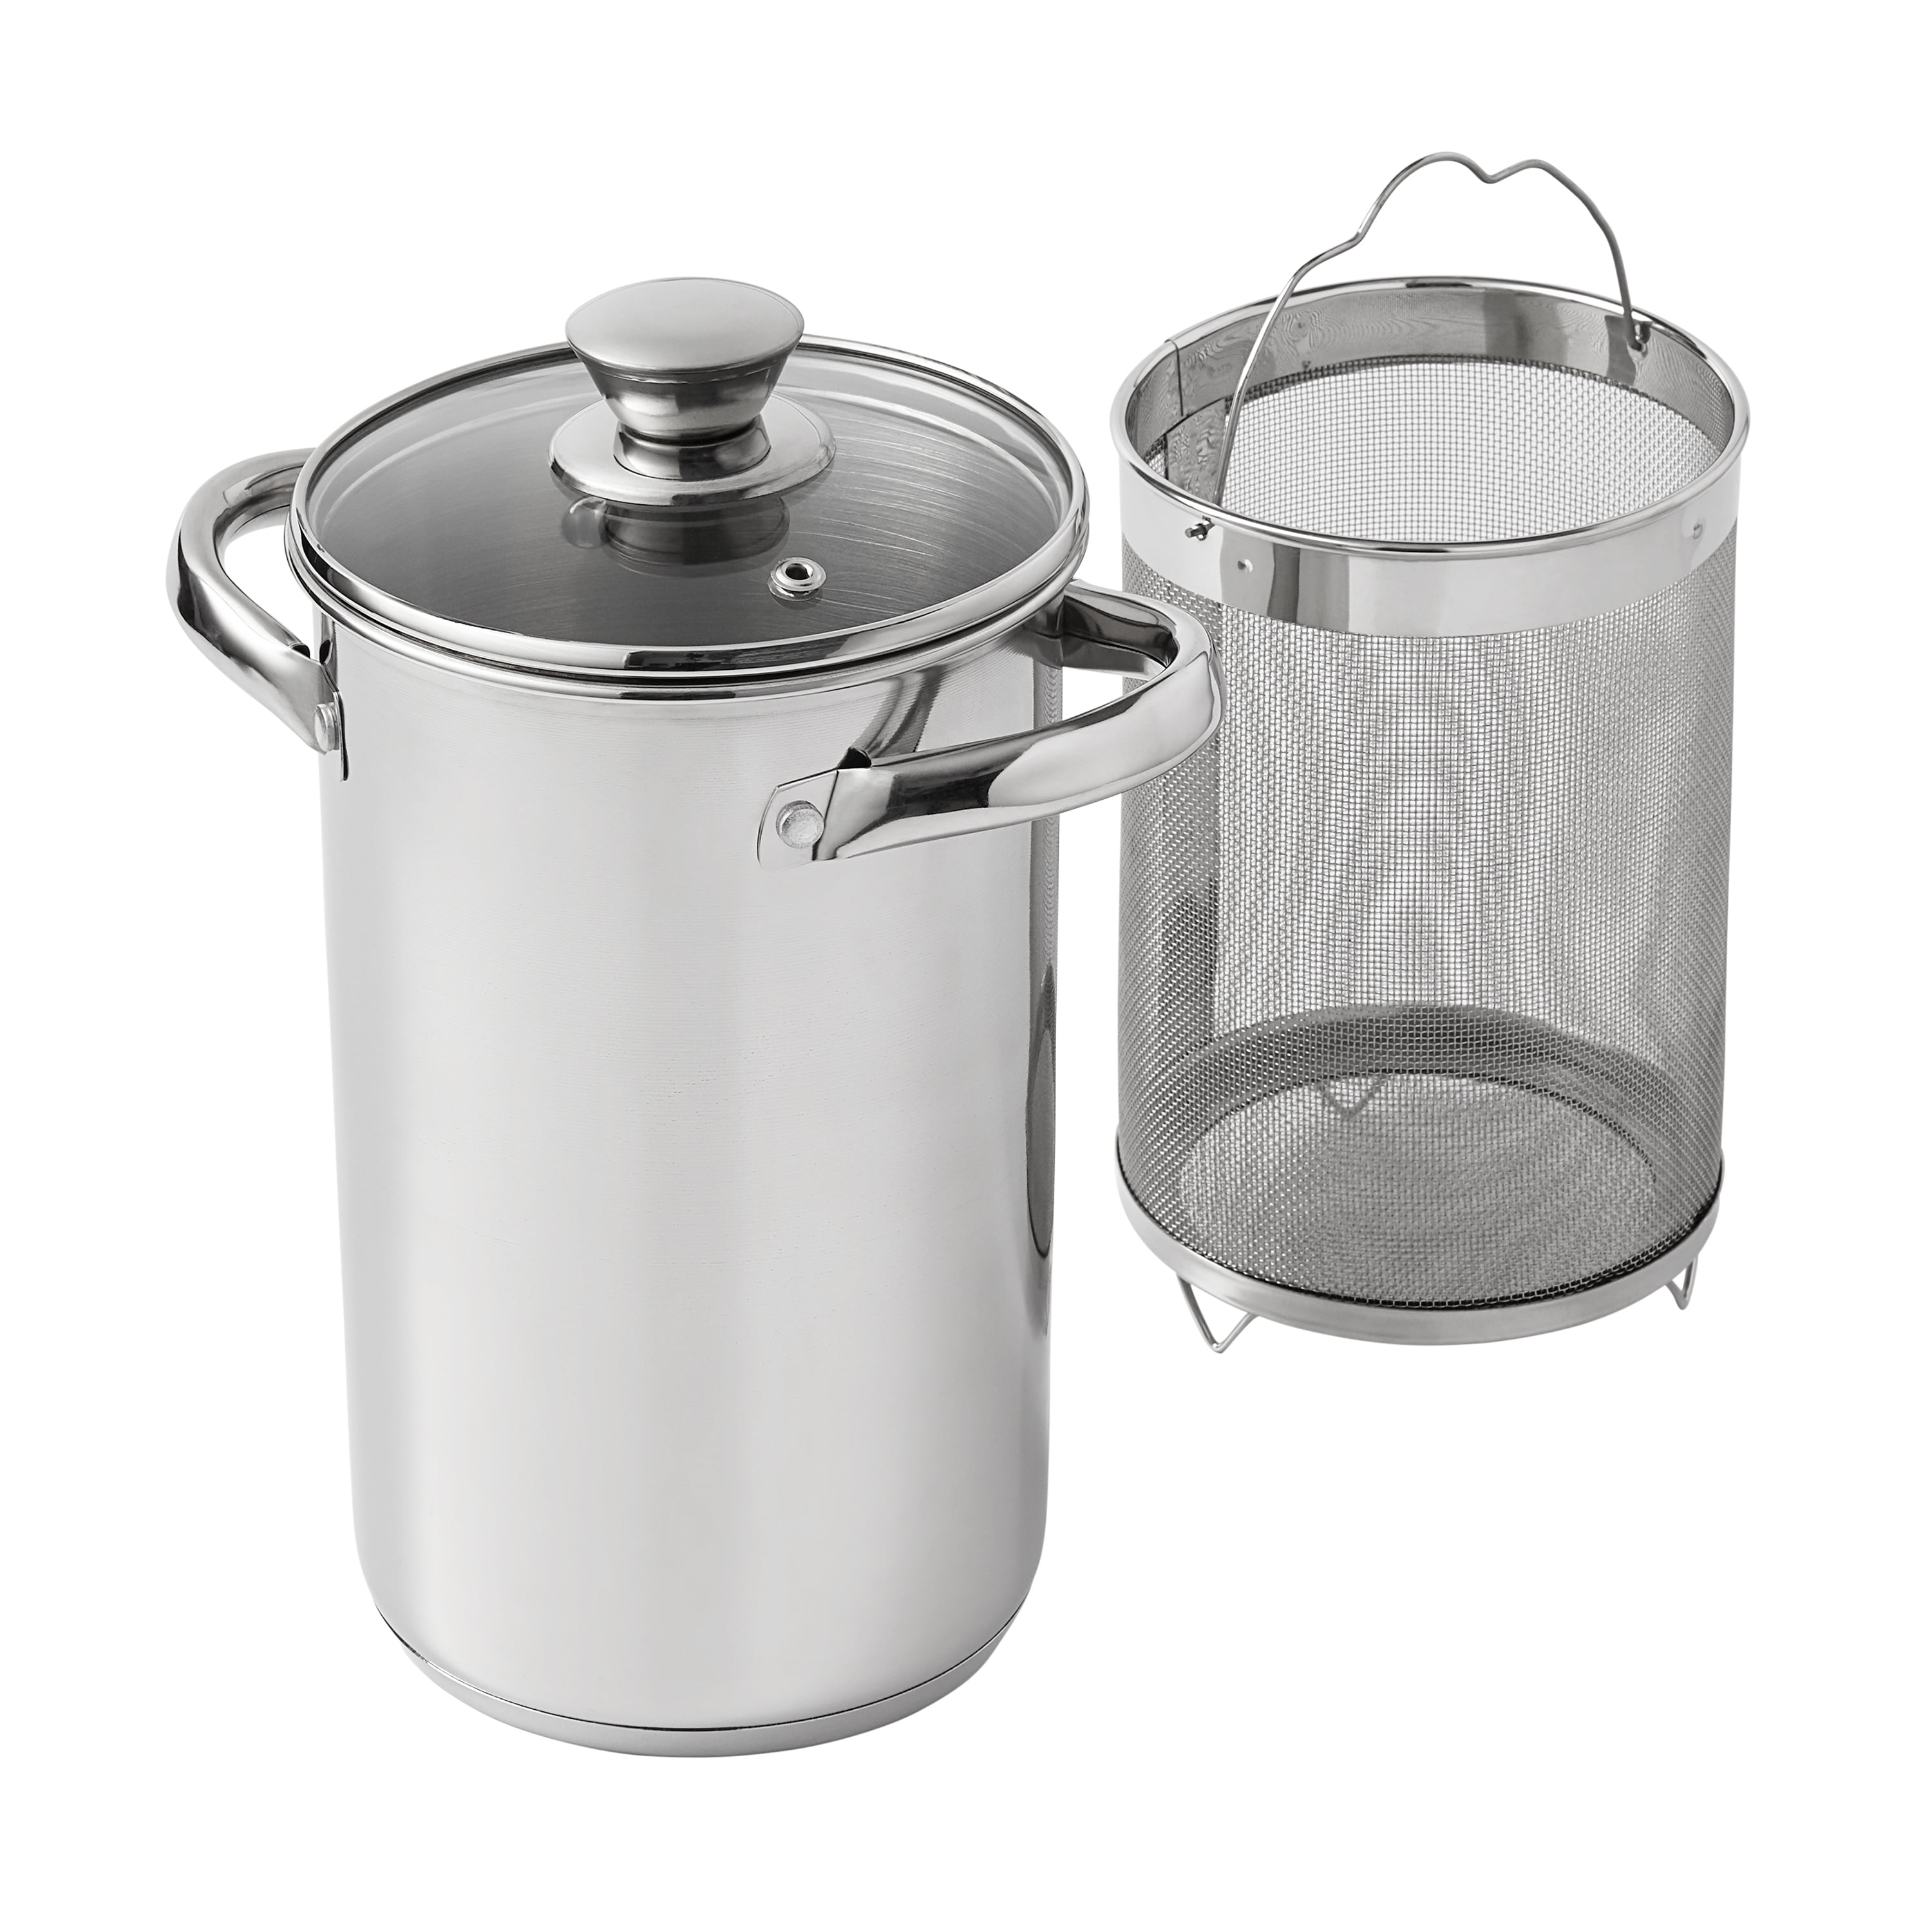 Carrying Steamer Pot Stainless Steel Cookware Portable Multipurpose Large Stock Pots Steaming Pot for Food, Pasta, Tamales Veggies Dumpling 22cm Combo